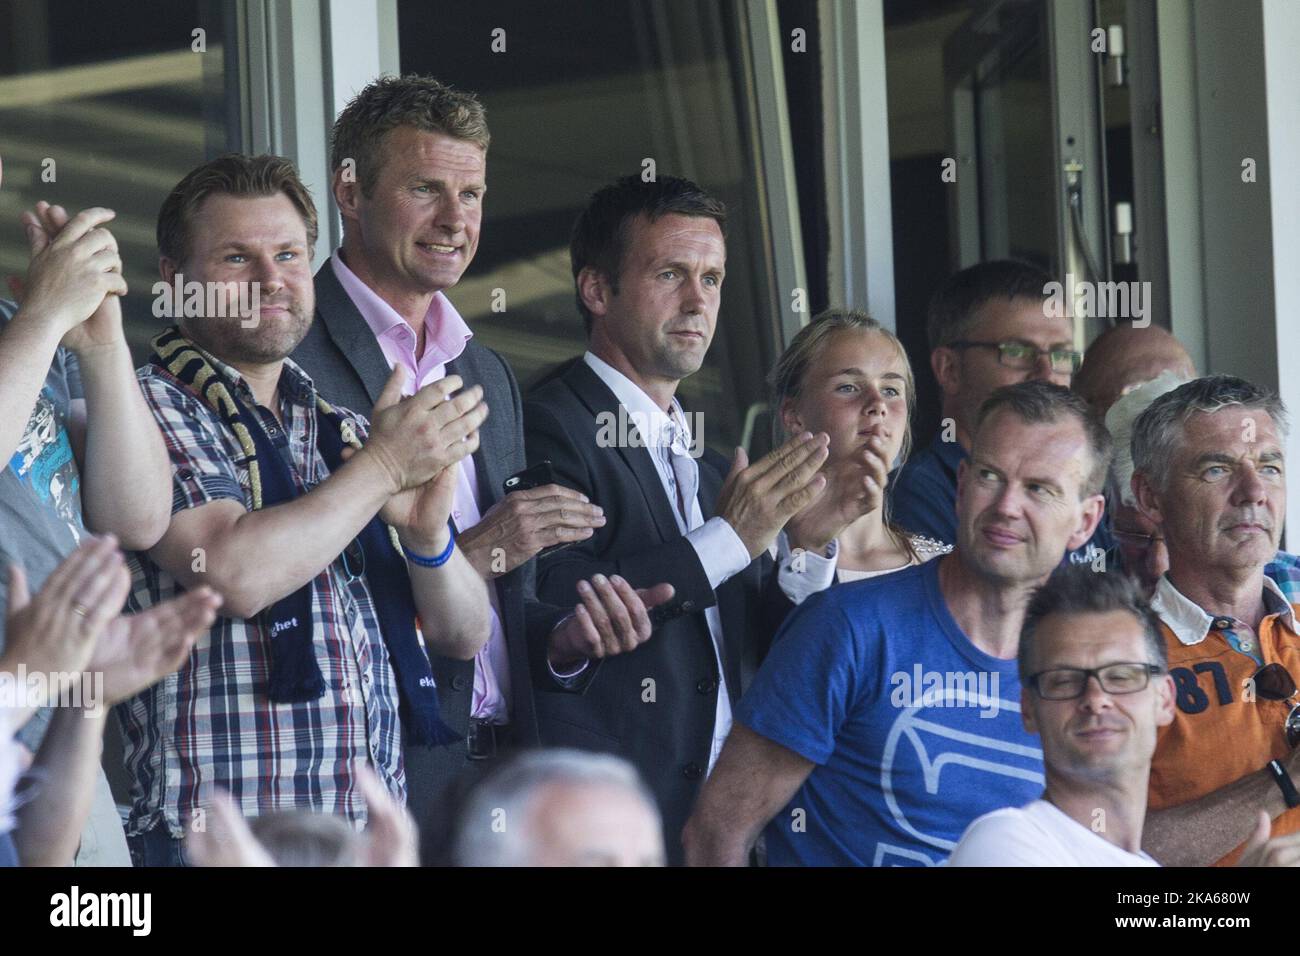 Incoming manager of Scottish Premiership club Celtic Ronny Deila (C) and Director of Football in Stromsgodset, Jostein Flo (2nd) from left) on the stand during the match between Deila`s former club Stromsgodset and Haugesund in the Norwegian top football league in Drammen, 9 June 2014. Photo by Audun Braastad, NTB scanpix Stock Photo